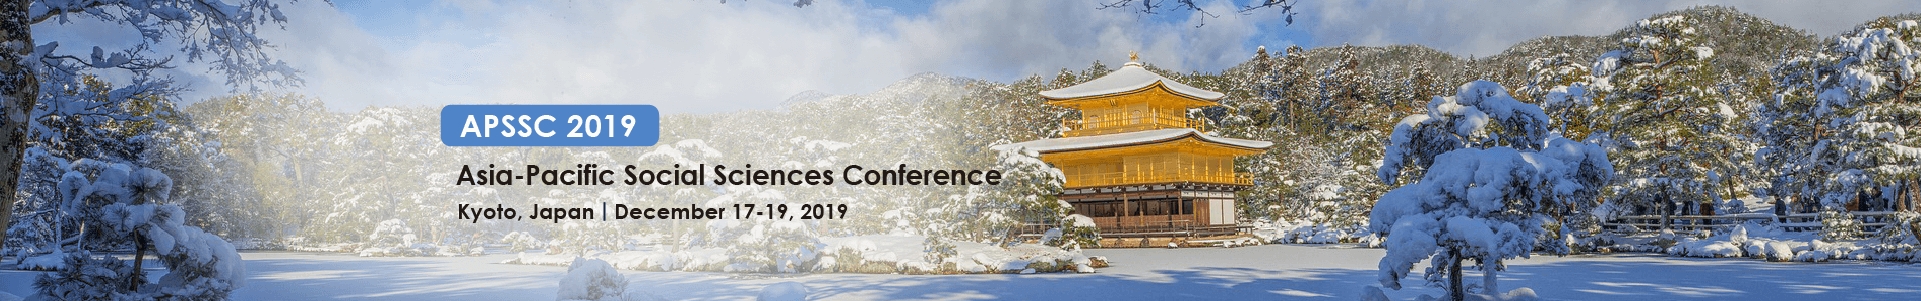 2019 Kyoto APSSC Asia-Pacific Social Science Conference